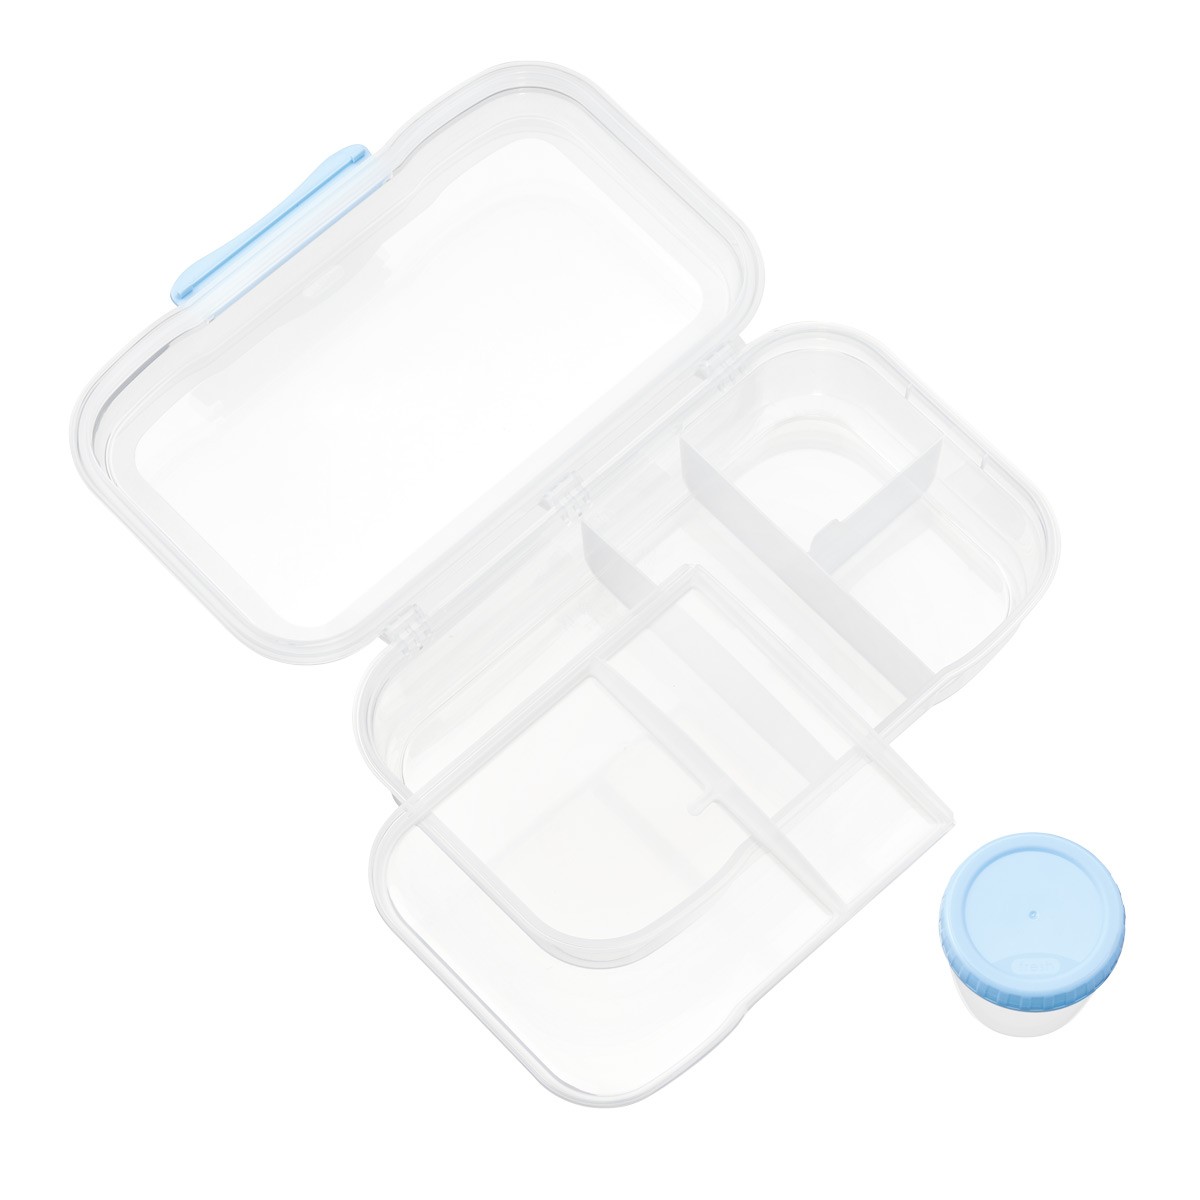 Plastic Food Container Bento Box | The Container Store